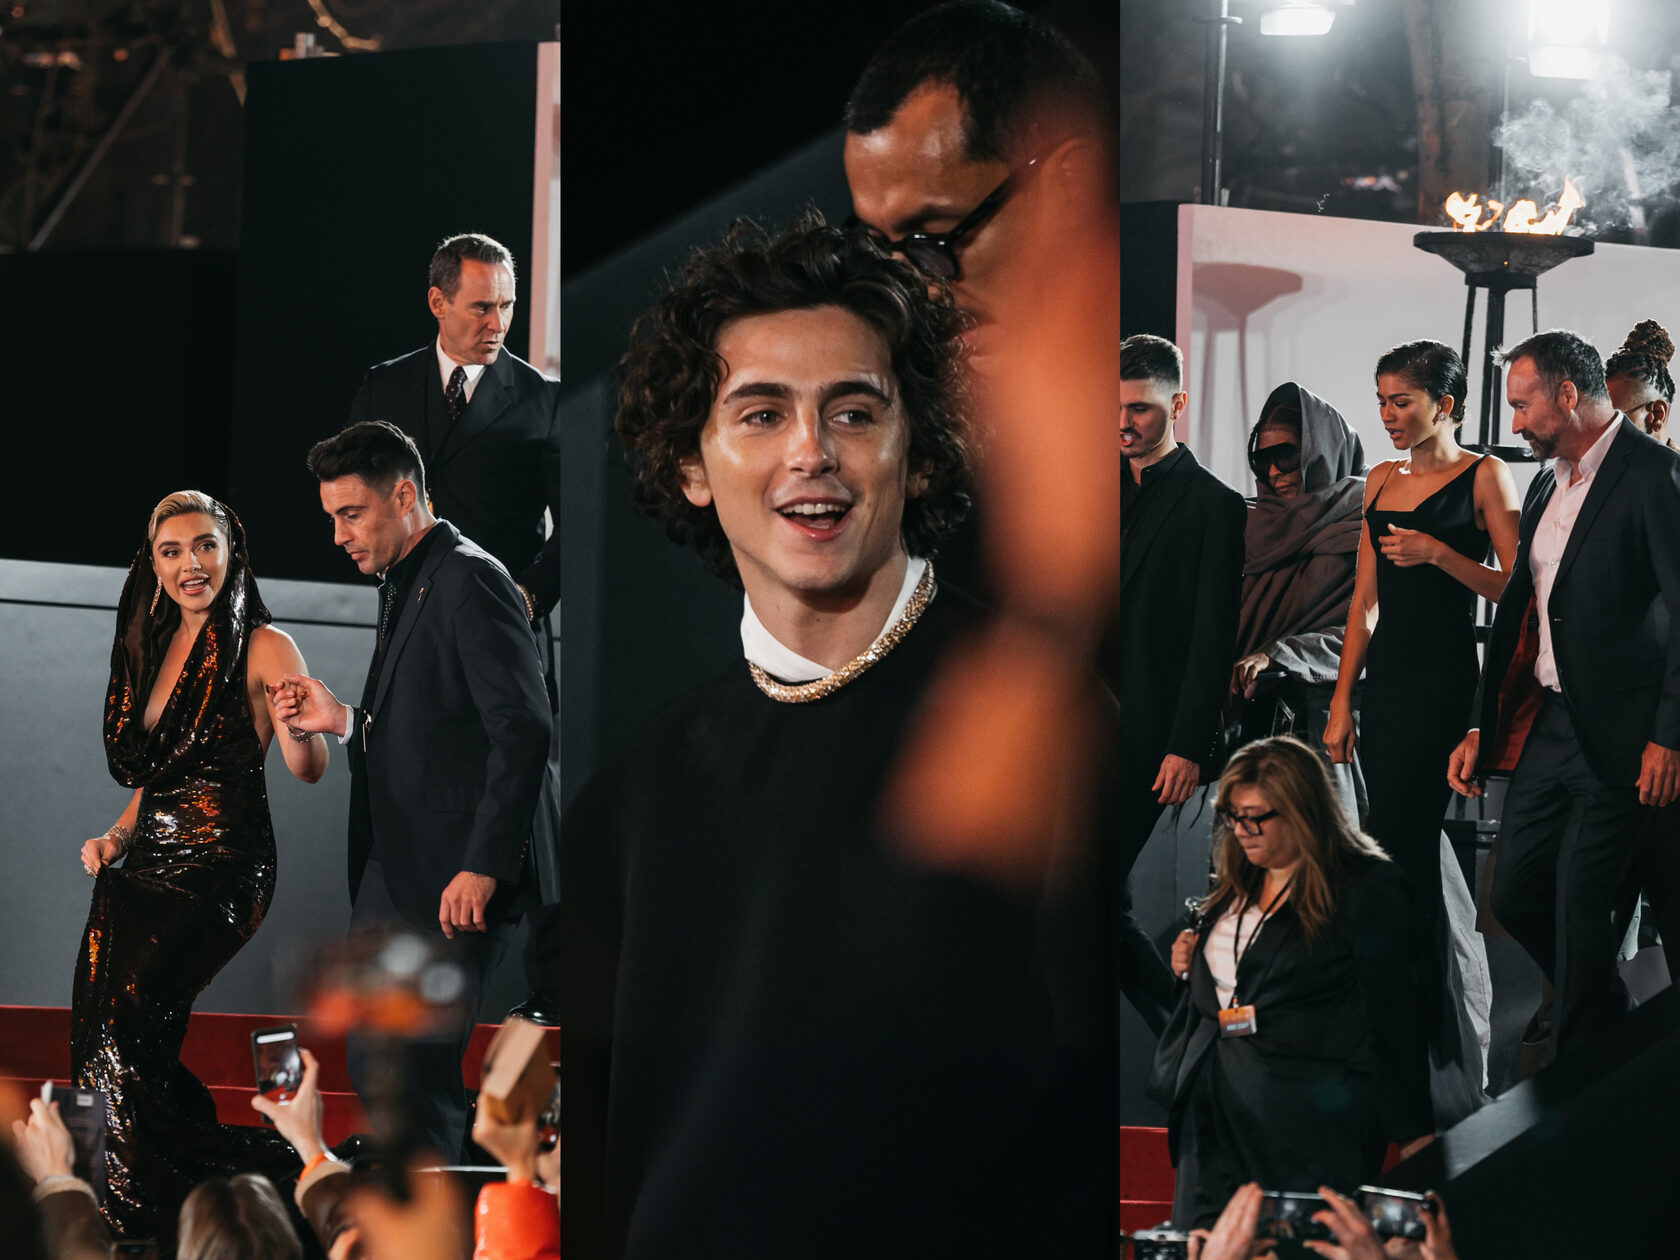 Timothée Chalamet, Florence Pugh, and Zendaya captured in a candid moment while walking the red carpet, with Timothée in the foreground smiling broadly at the fans, Florence in a glittering black gown escorted by a suited gentleman, and Zendaya in an elegant black dress, as they're surrounded by event staff and the warm glow of event lights.